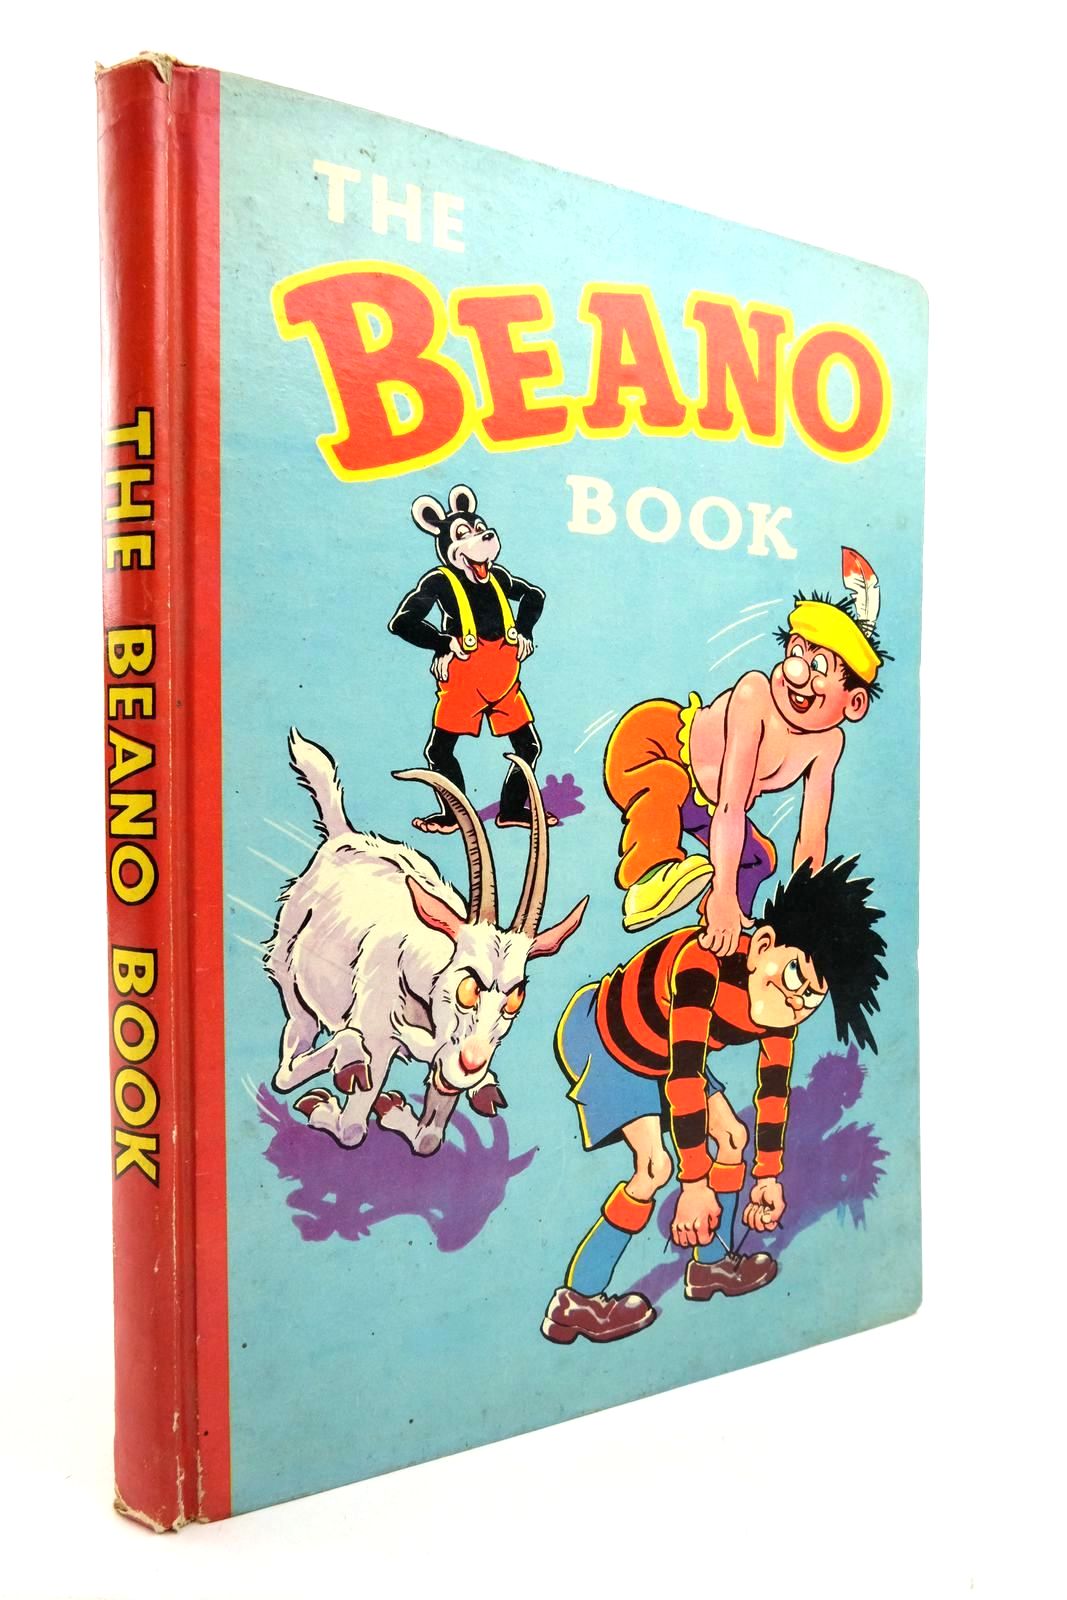 Photo of THE BEANO BOOK 1959 published by D.C. Thomson &amp; Co Ltd. (STOCK CODE: 2137506)  for sale by Stella & Rose's Books